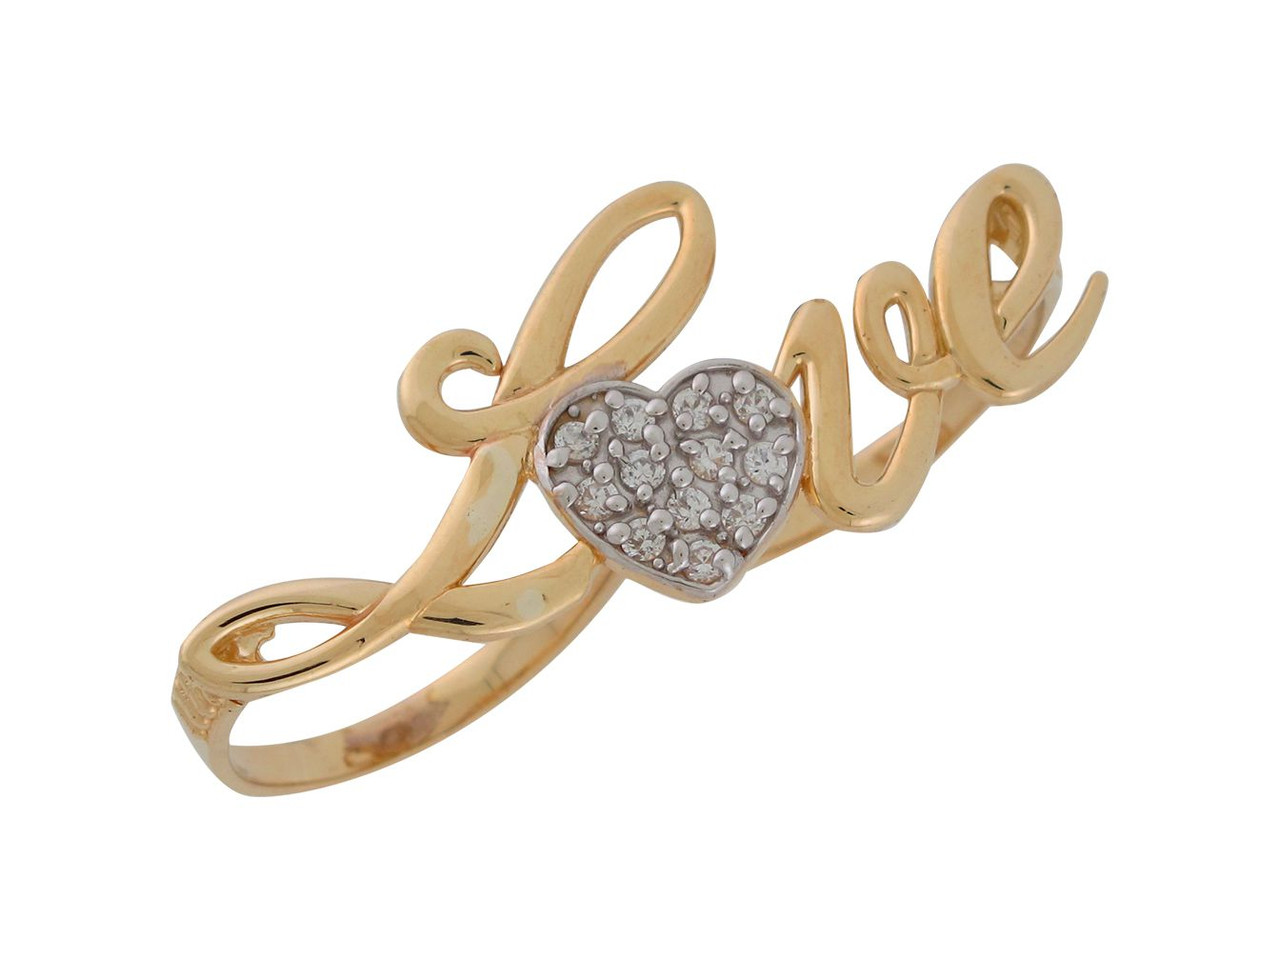 Two-Tone Gold Studded Ladies Polish Love (JL# Finger Jewelry Two High Ring Liquidation - R9325)